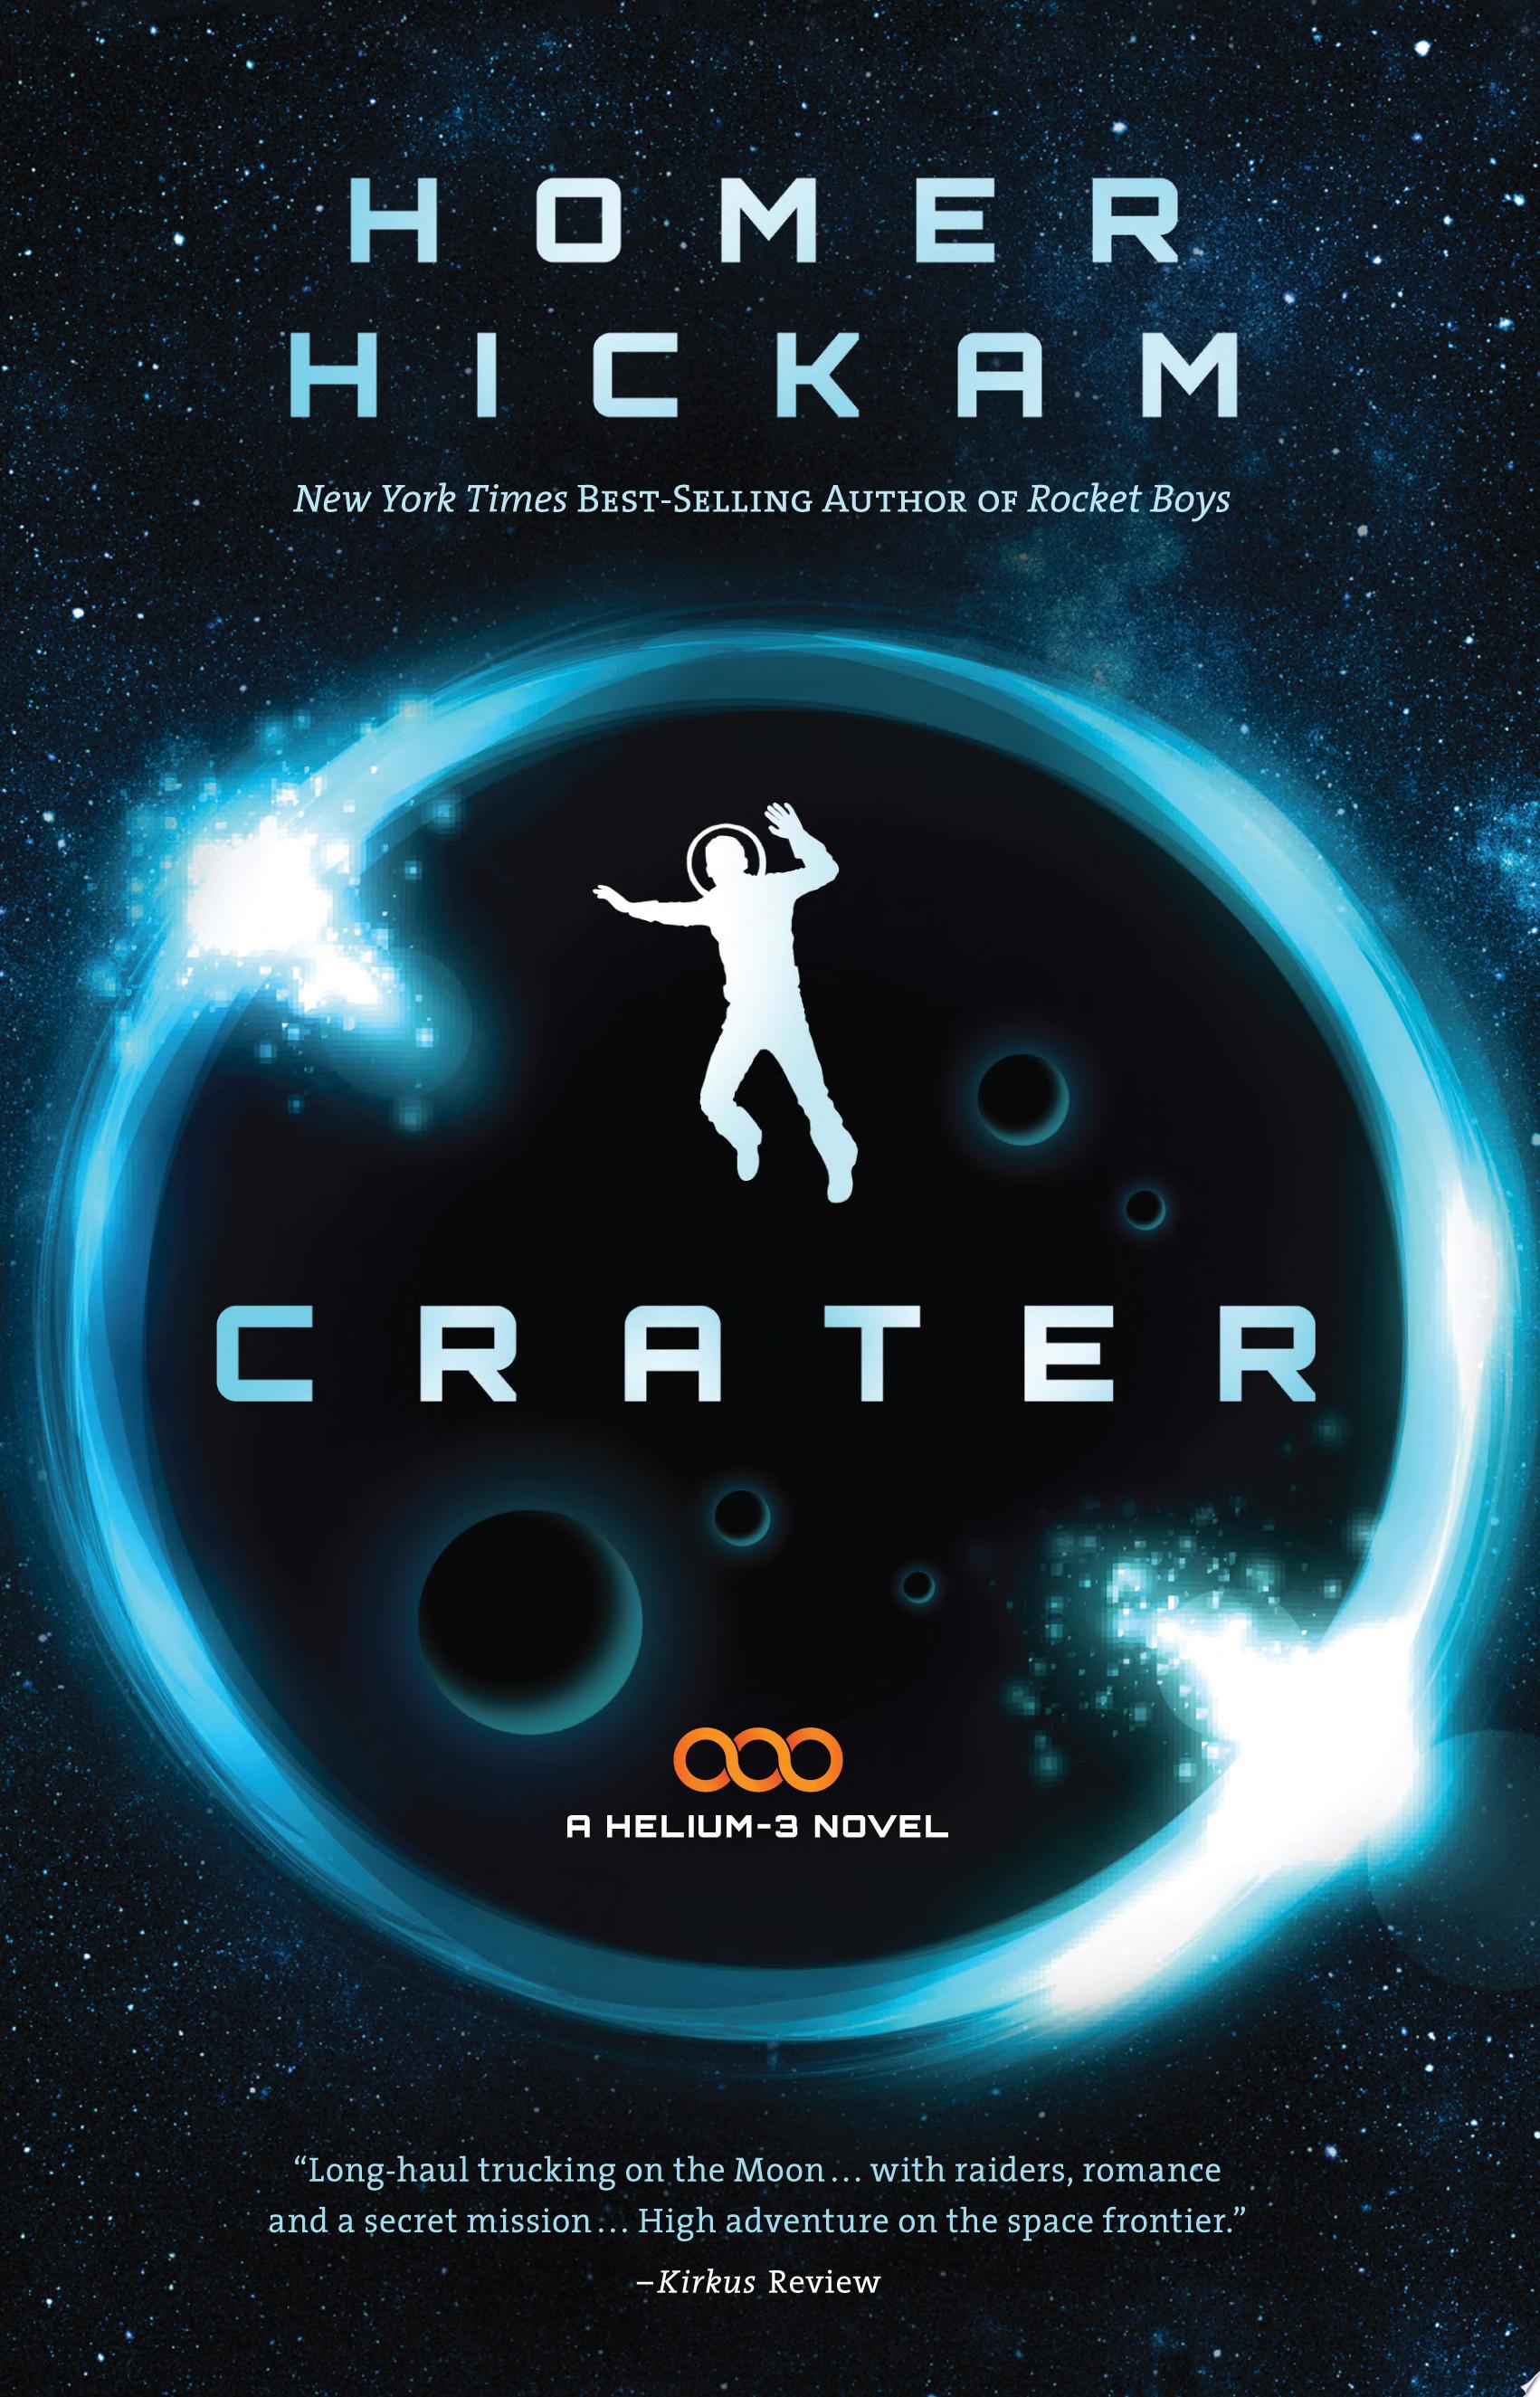 Image for "Crater"